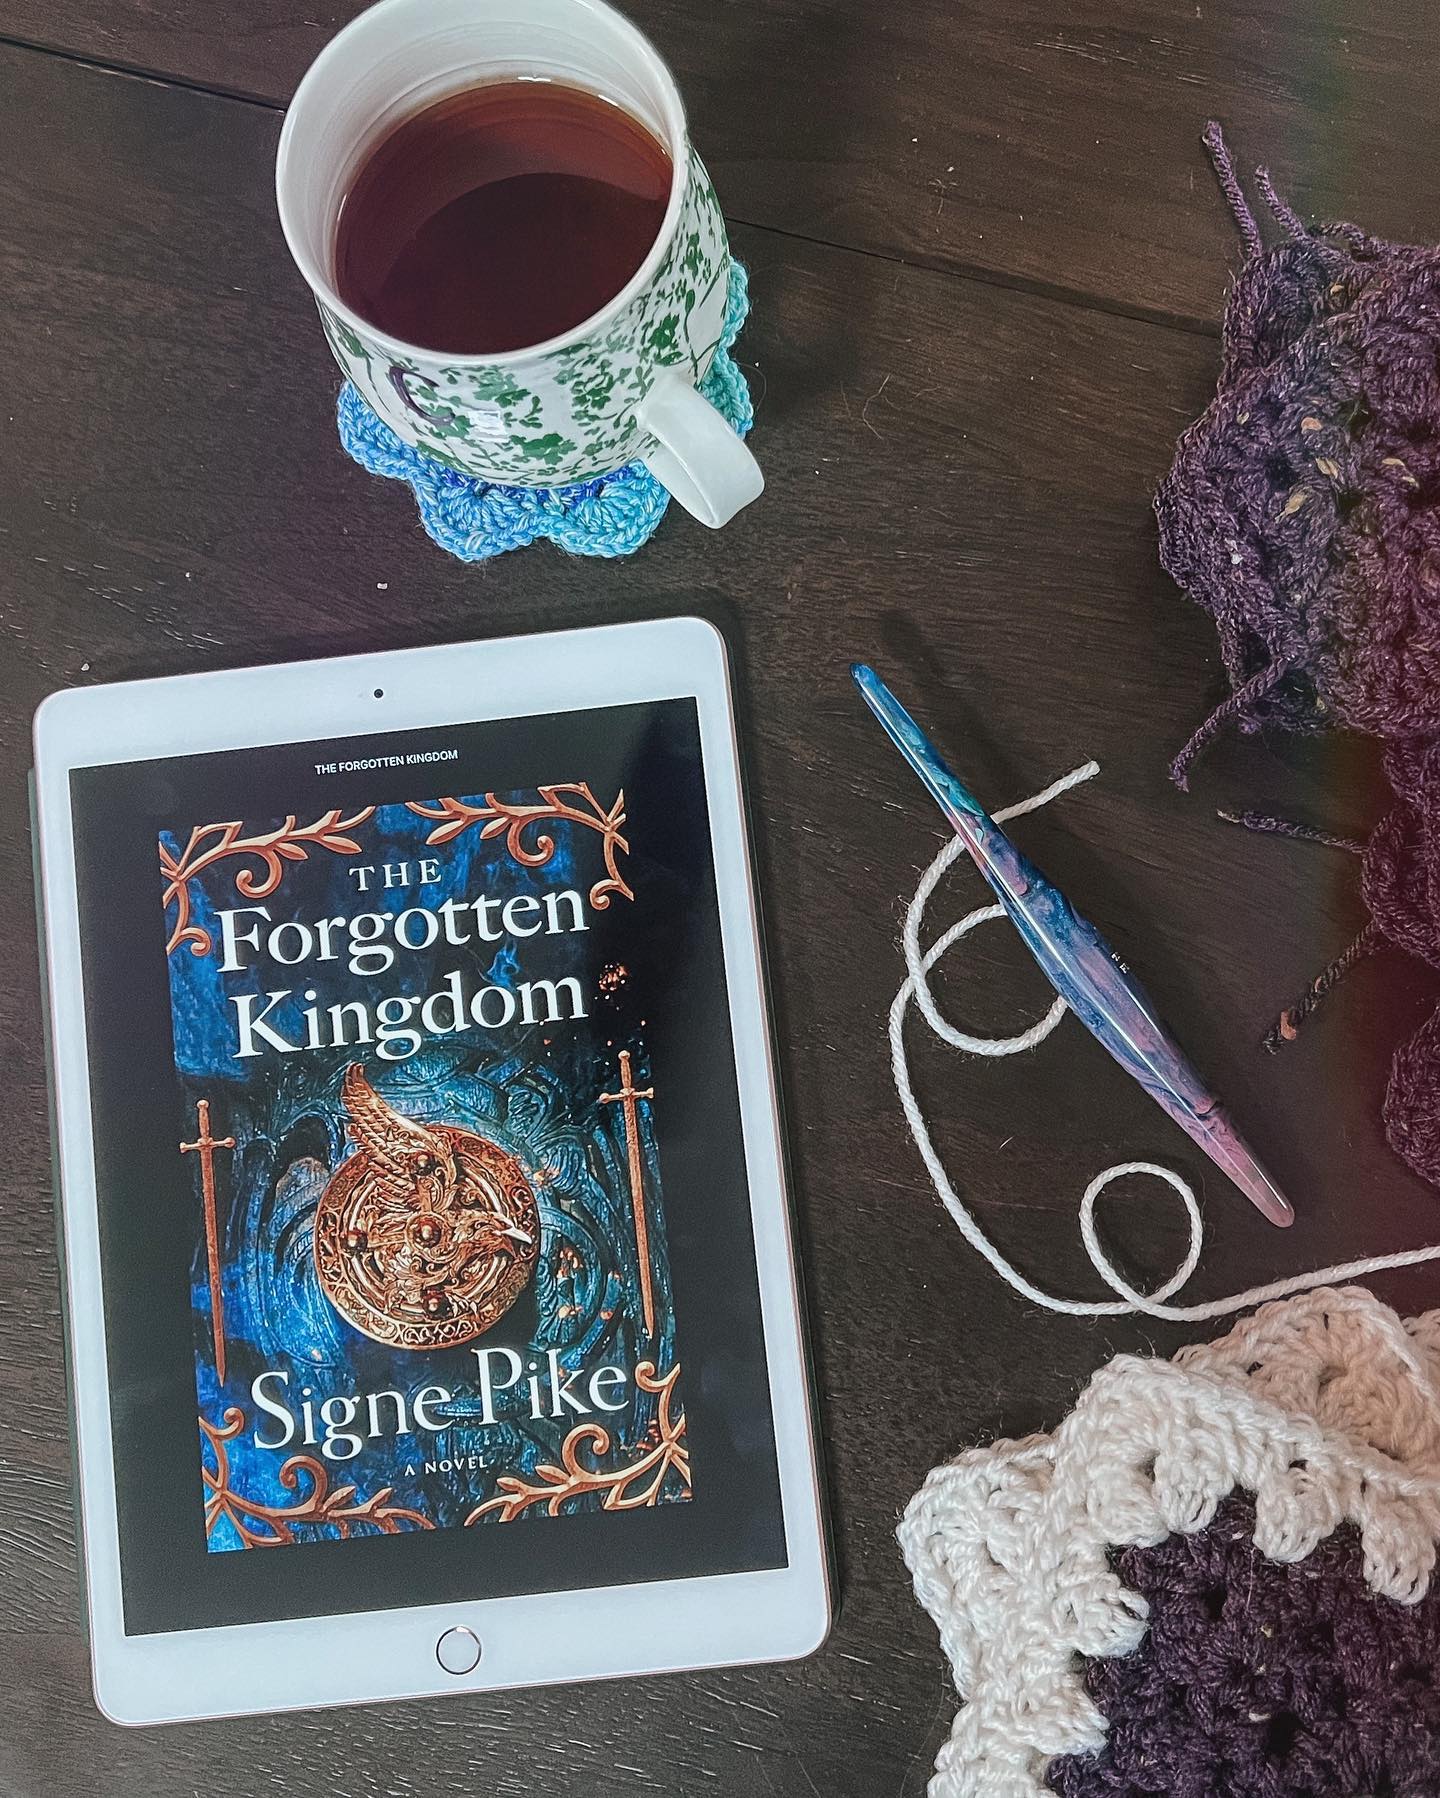 The Forgotten Kingdom by Signe Pike